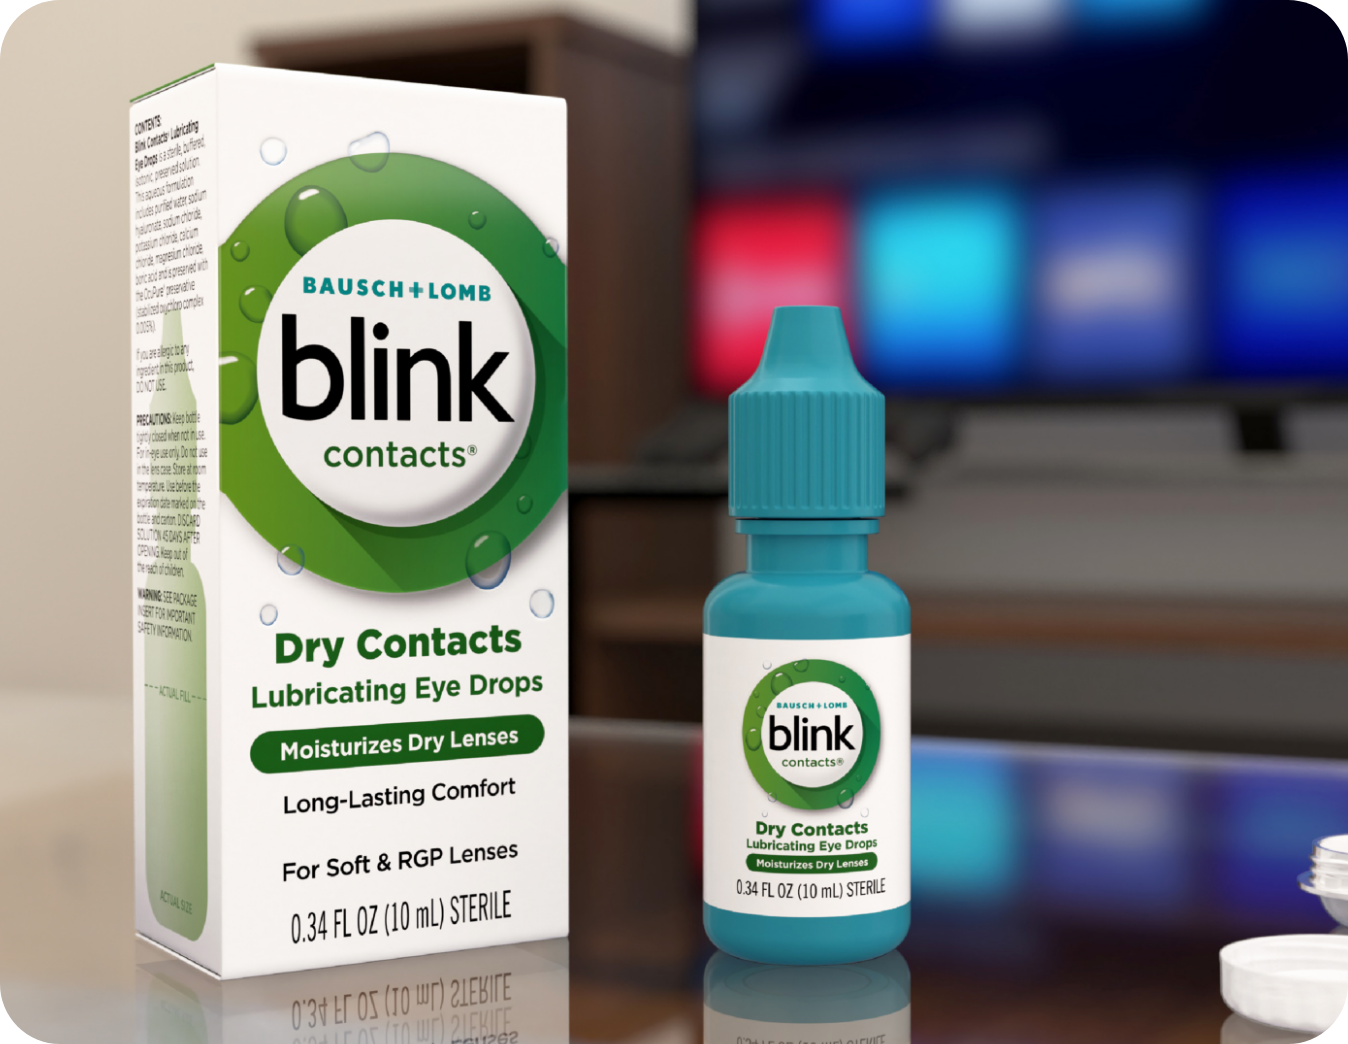 Blink Contacts Lubricating Eye Drops bottle and carton on a desk in front of a computer monitor